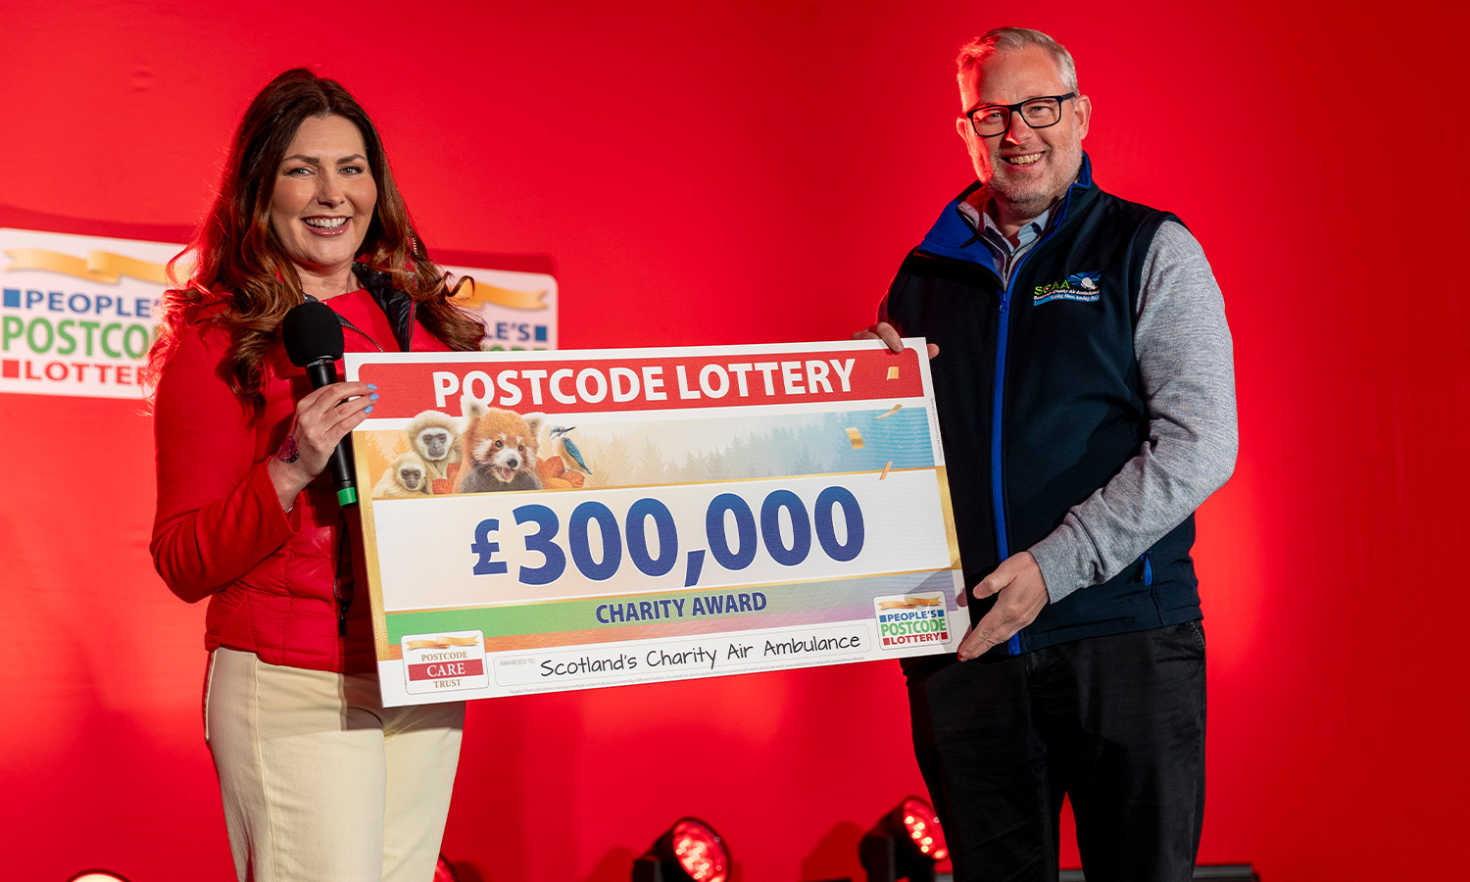 Air We Go: David Craig, chief executive of Scotland's Charity Air Ambulance, being presented with a bumper cheque by Judie McCourt at our latest Postcode Millions event in Perth